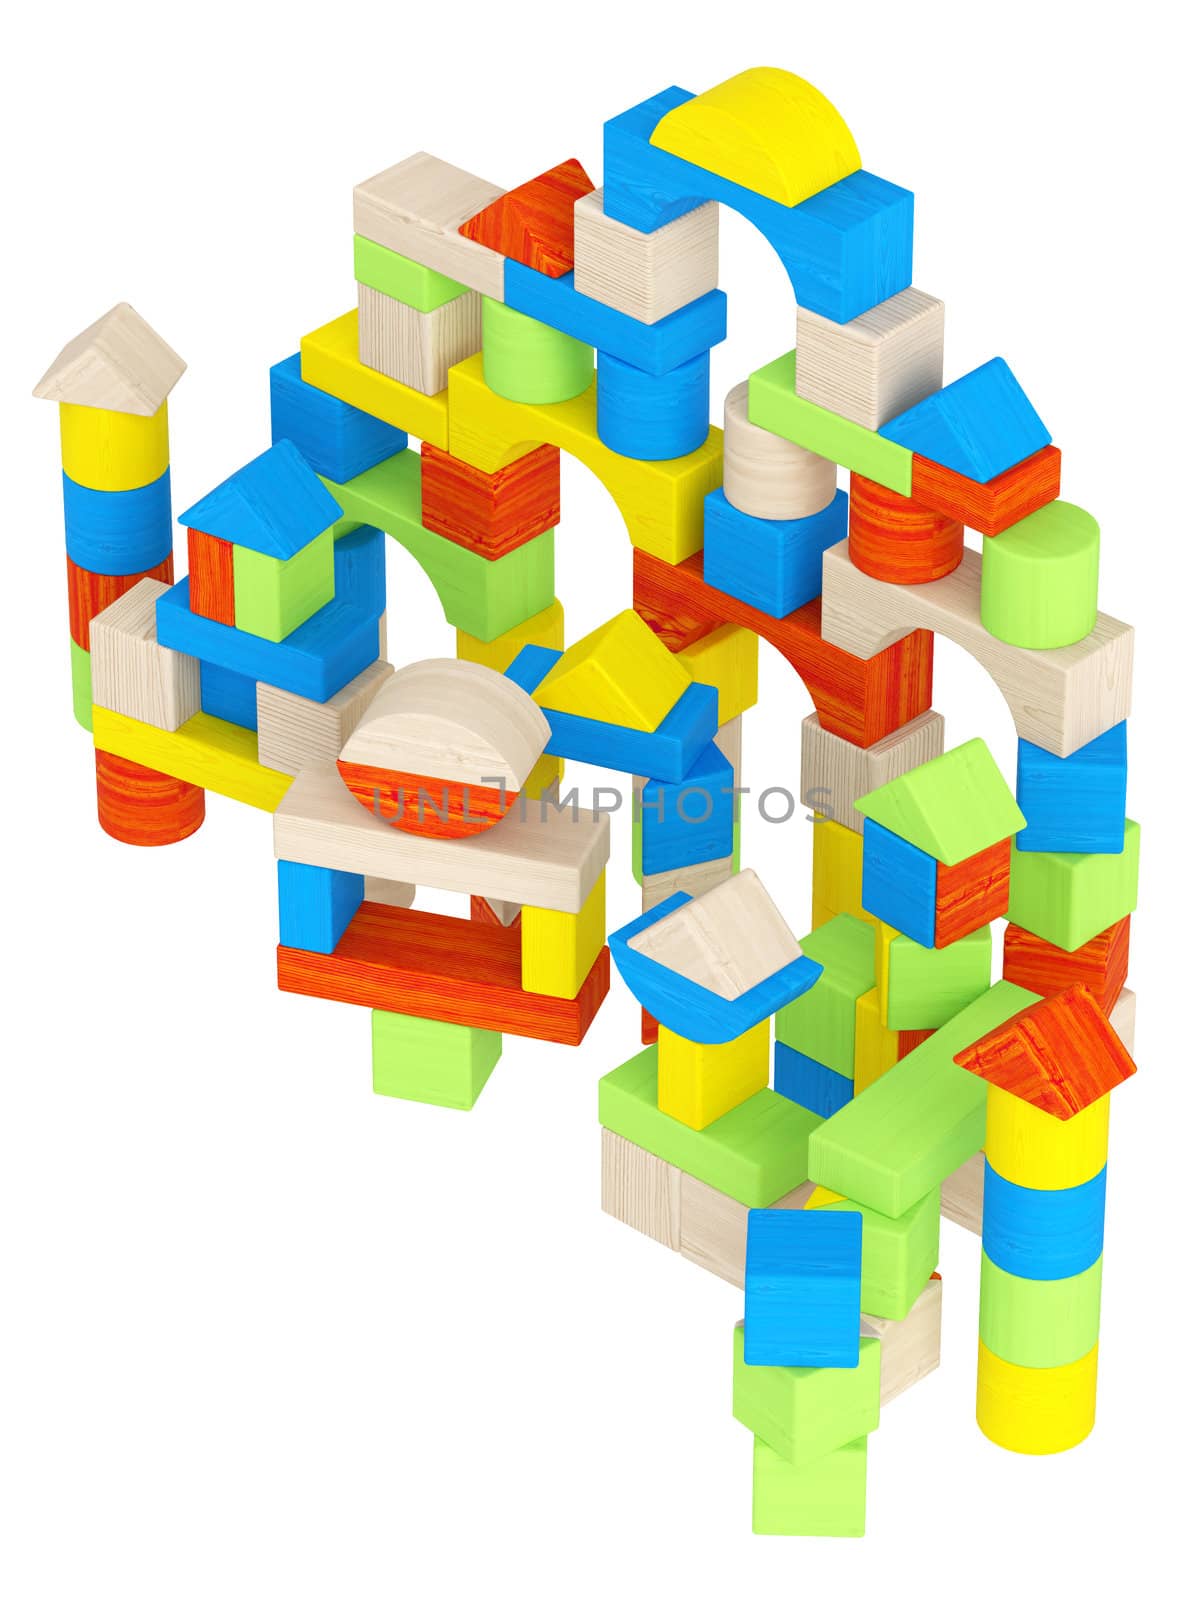 Colourful array of different shaped building blocks in geometric shapes including triangles, tubular, curved and arched for teaching a child creativity and design isolated on white